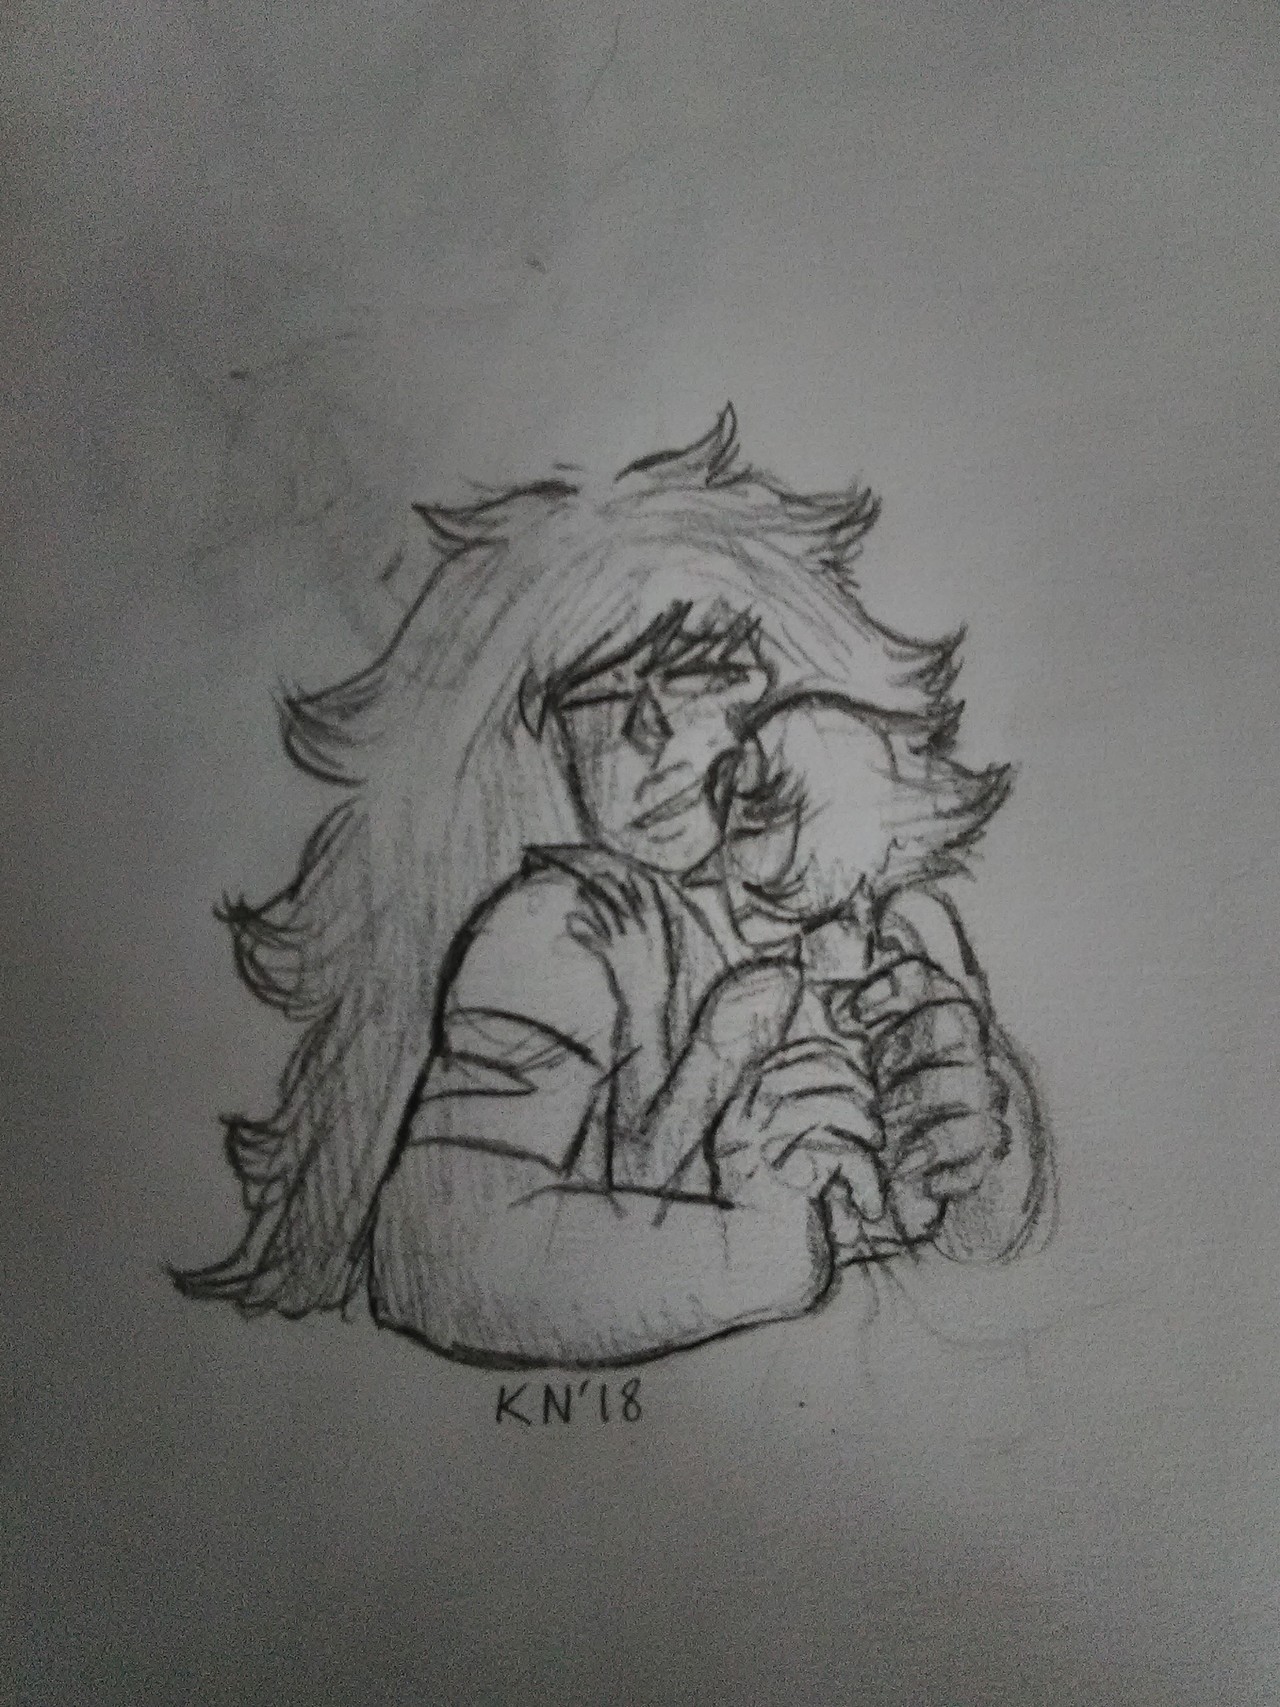 This ship, is honestly _really_ adorable, so here’s a sketch of Jaspearl.